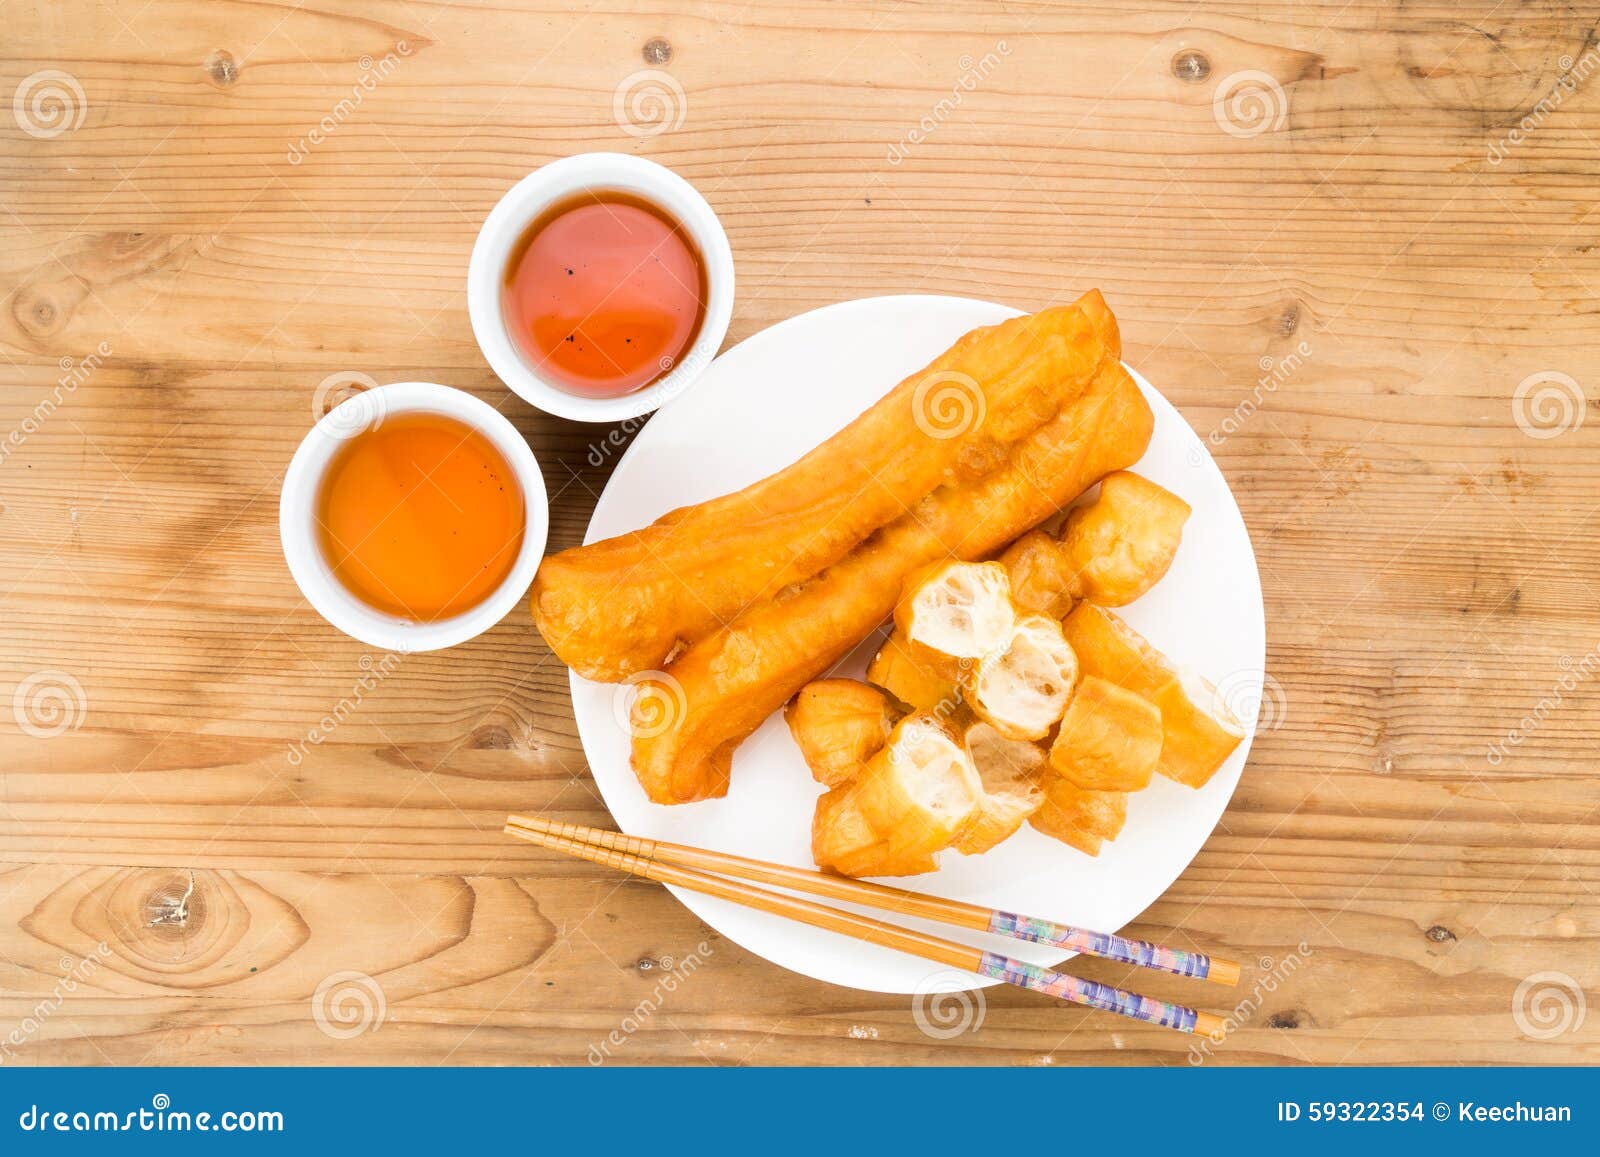 fried bread stick or you tiao served with chinese tea.